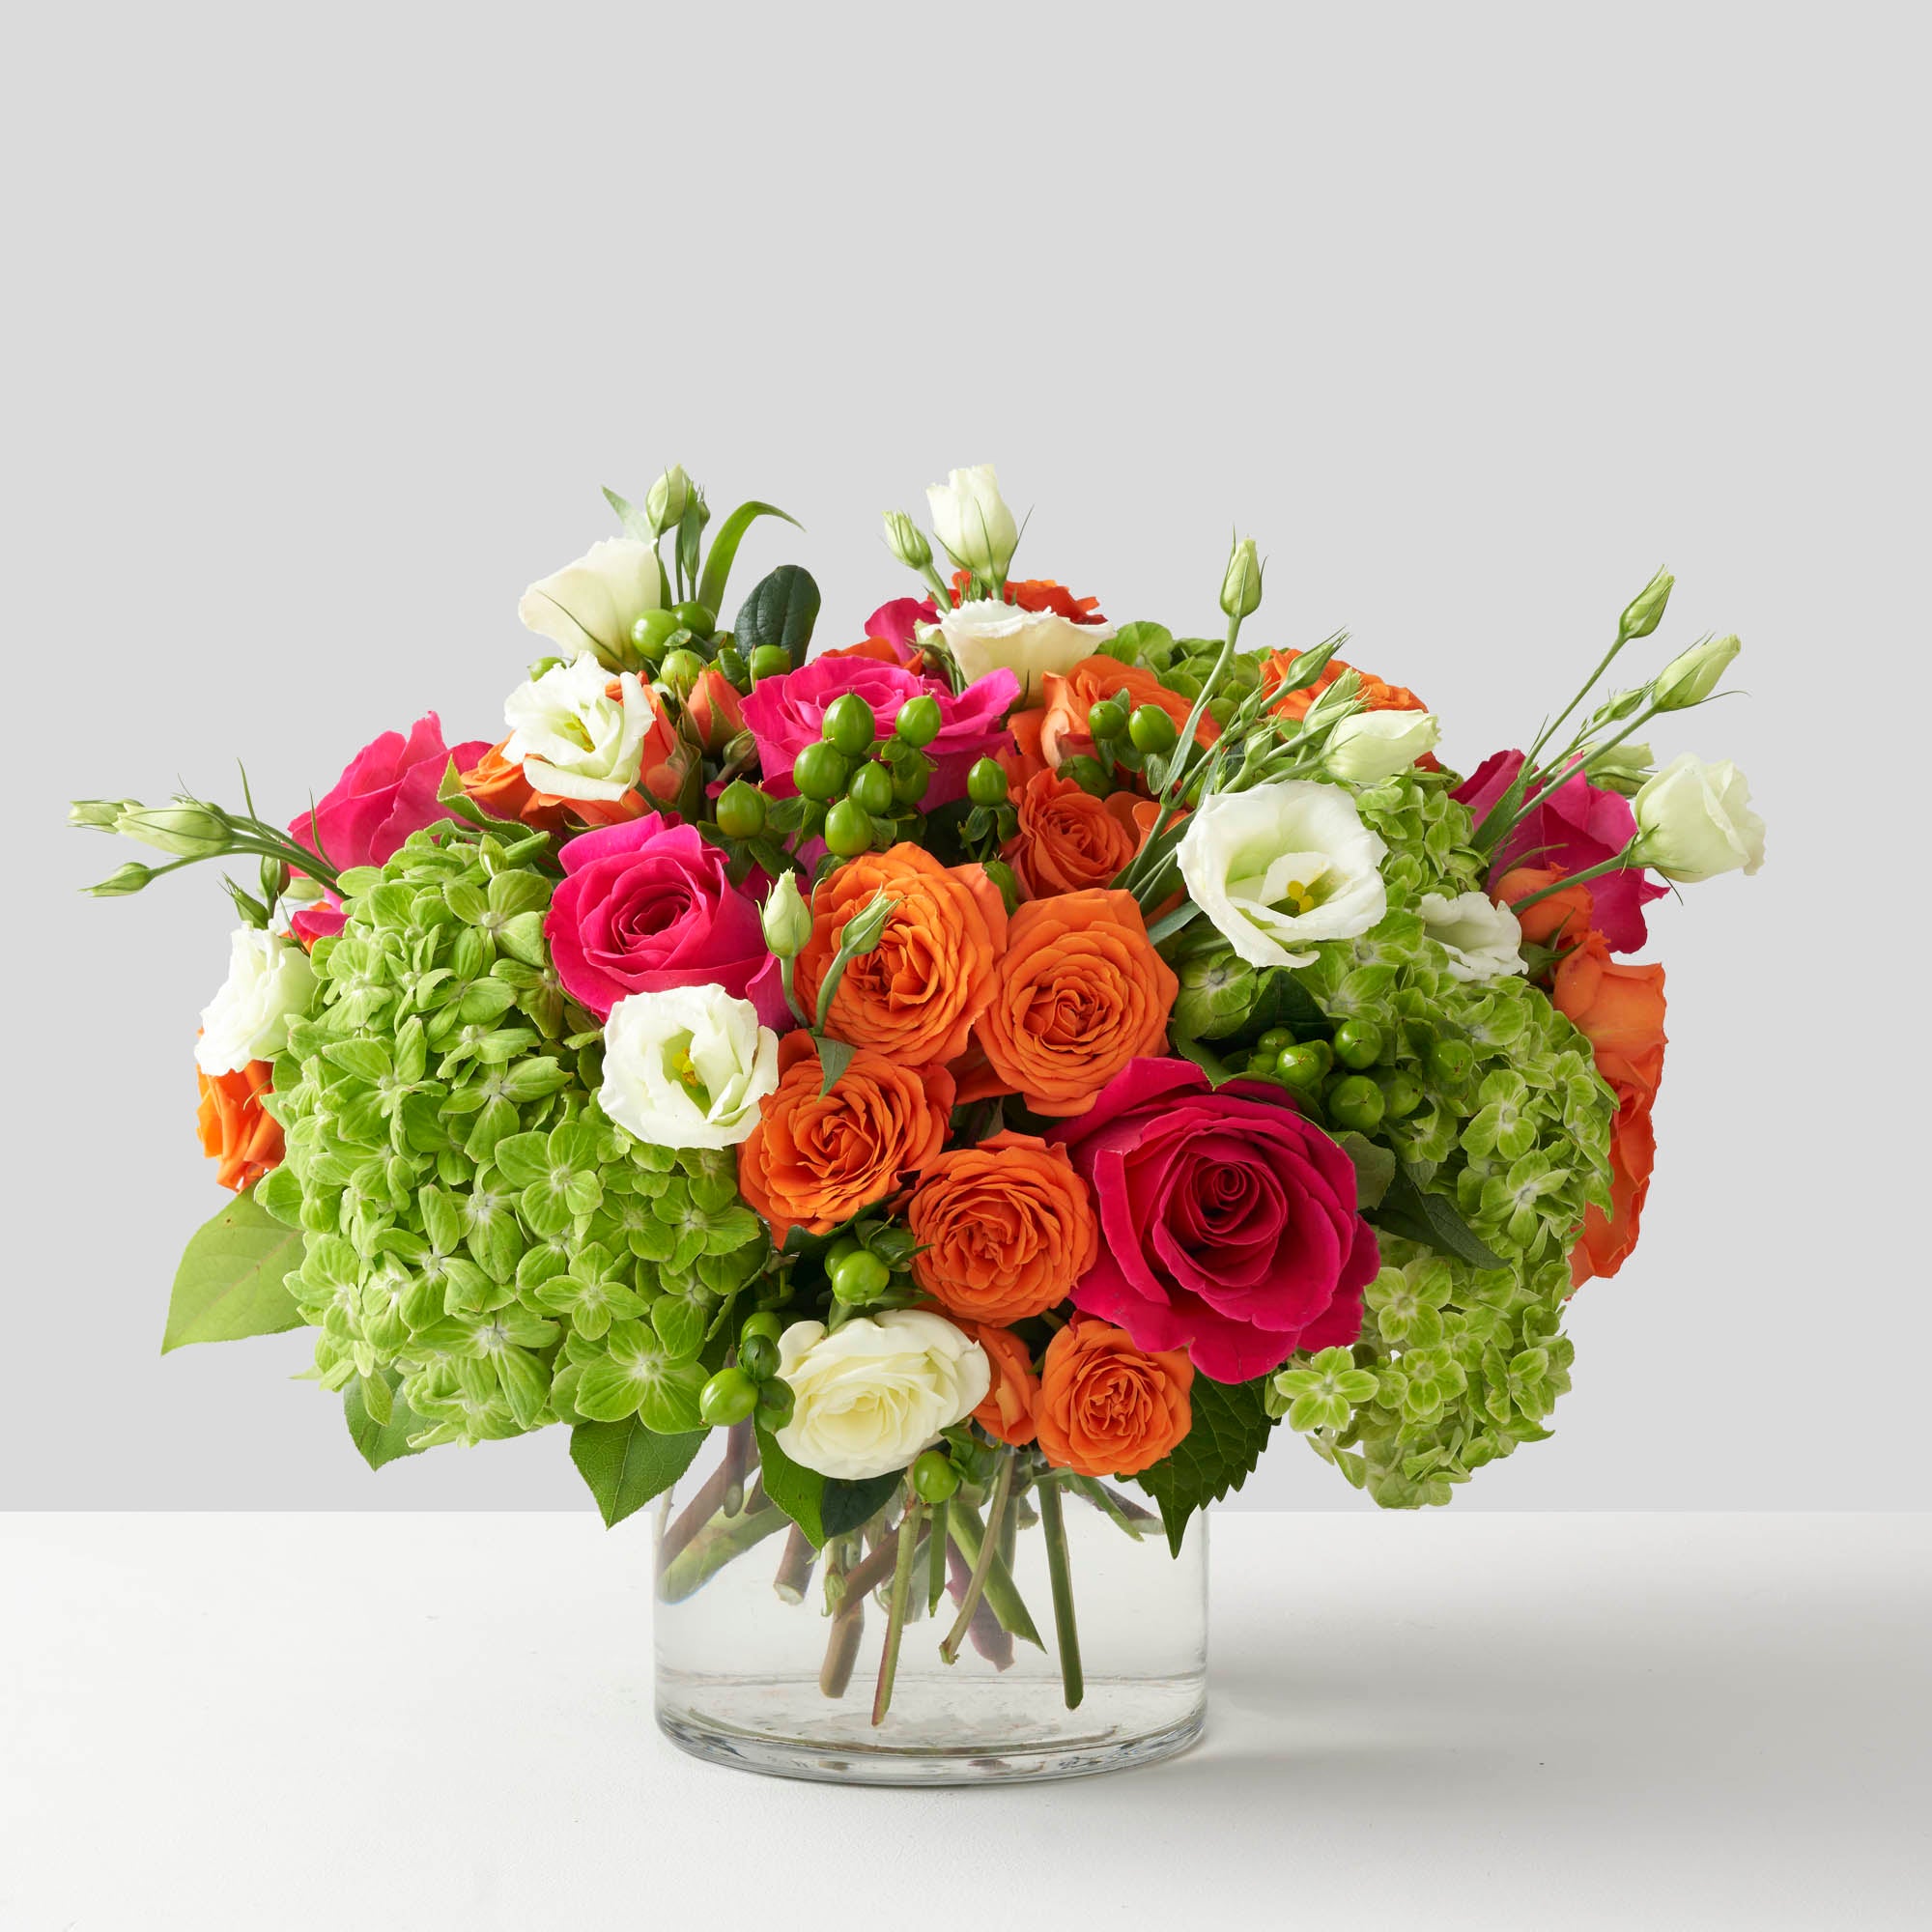 Hot pink, orange, lime green and white, flowers arranged in simple glass vase on white background.